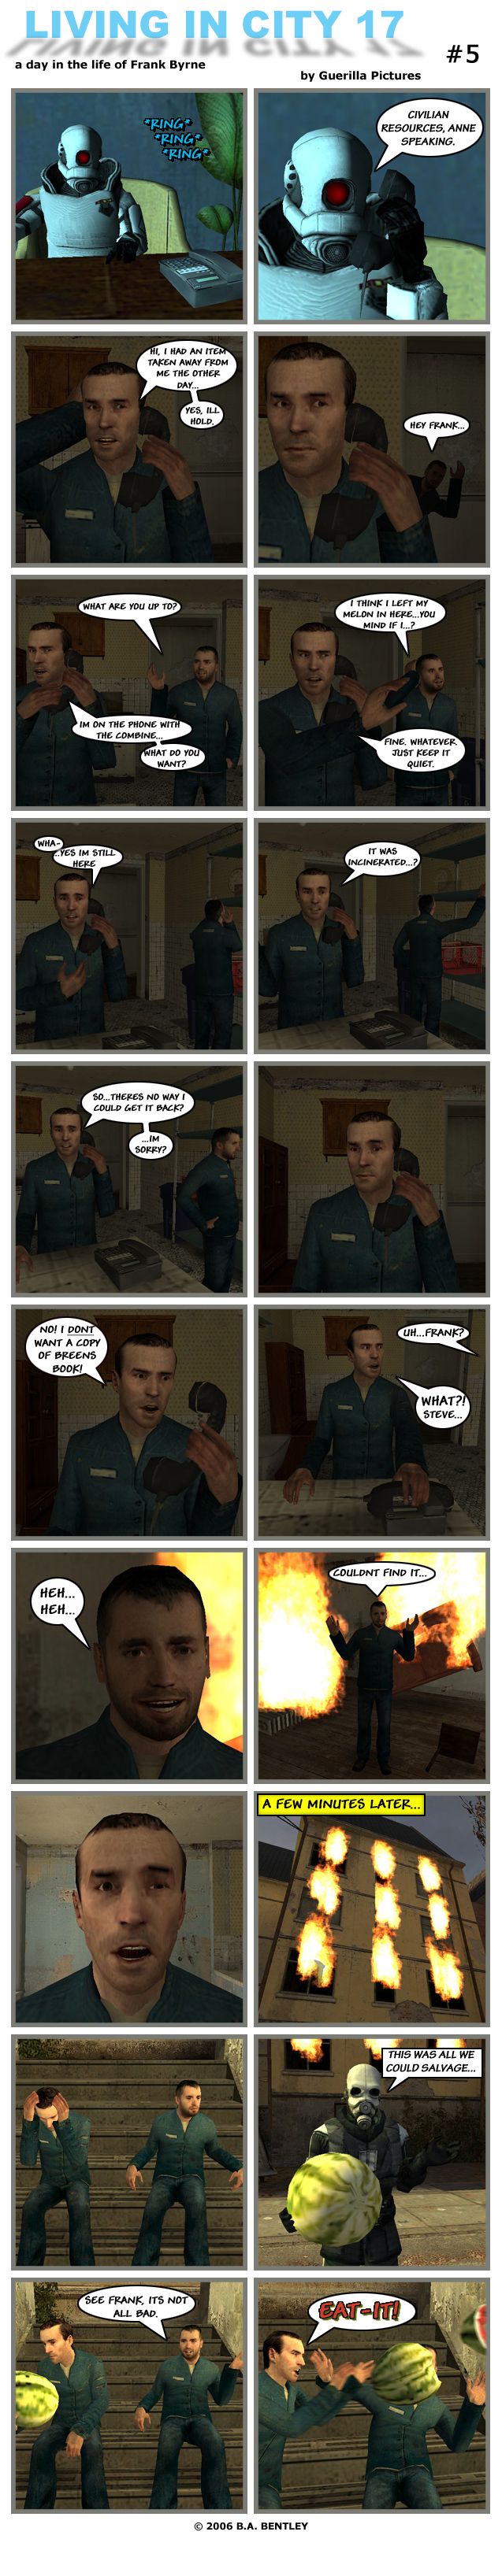 At the Citadel, a phone starts ringing in a desk where a Combine elite soldier is sitting. The Combine soldier picks up the phone and says it's Civilian Resources and Annie speaking. Frank greets her and explains that he had an item taken away from him the other day. After a moment, Frank says that yes, he'll hold. Steve then comes into the apartment and asks Frank what he's doing. Frank replies that he's on the phone with the Combine and asks what Steve wants. Steve explains that he thinks he left his melon in there and asks if Frank minds if he looks for it. Frank tells him fine, whatever, just keep it quiet. Frank then goes back to the call, saying he's still there, then is told his item was incinerated. In shock, Frank asks if there is no way to get it back. He looks confused by the reply then angrily screams into the phone that he does not want a copy of Breen's book. Steve then calls for Frank, who angrily replies what. Steve awkwardly laughs. Behind him there's a huge fire raging in the apartment. Steve meekily tells Frank he couldn't find it. Frank stares in shock. A few minutes later, the whole building is on fire. Frank and Steve are outside. A Civil Protection officer approaches holding a melon and tells them it was all they could salvage. Frank takes the melon and Steve cheerfully tells him it's not all bad. Frank shoves the melon into Steve's face and screams at him to eat it. The end.